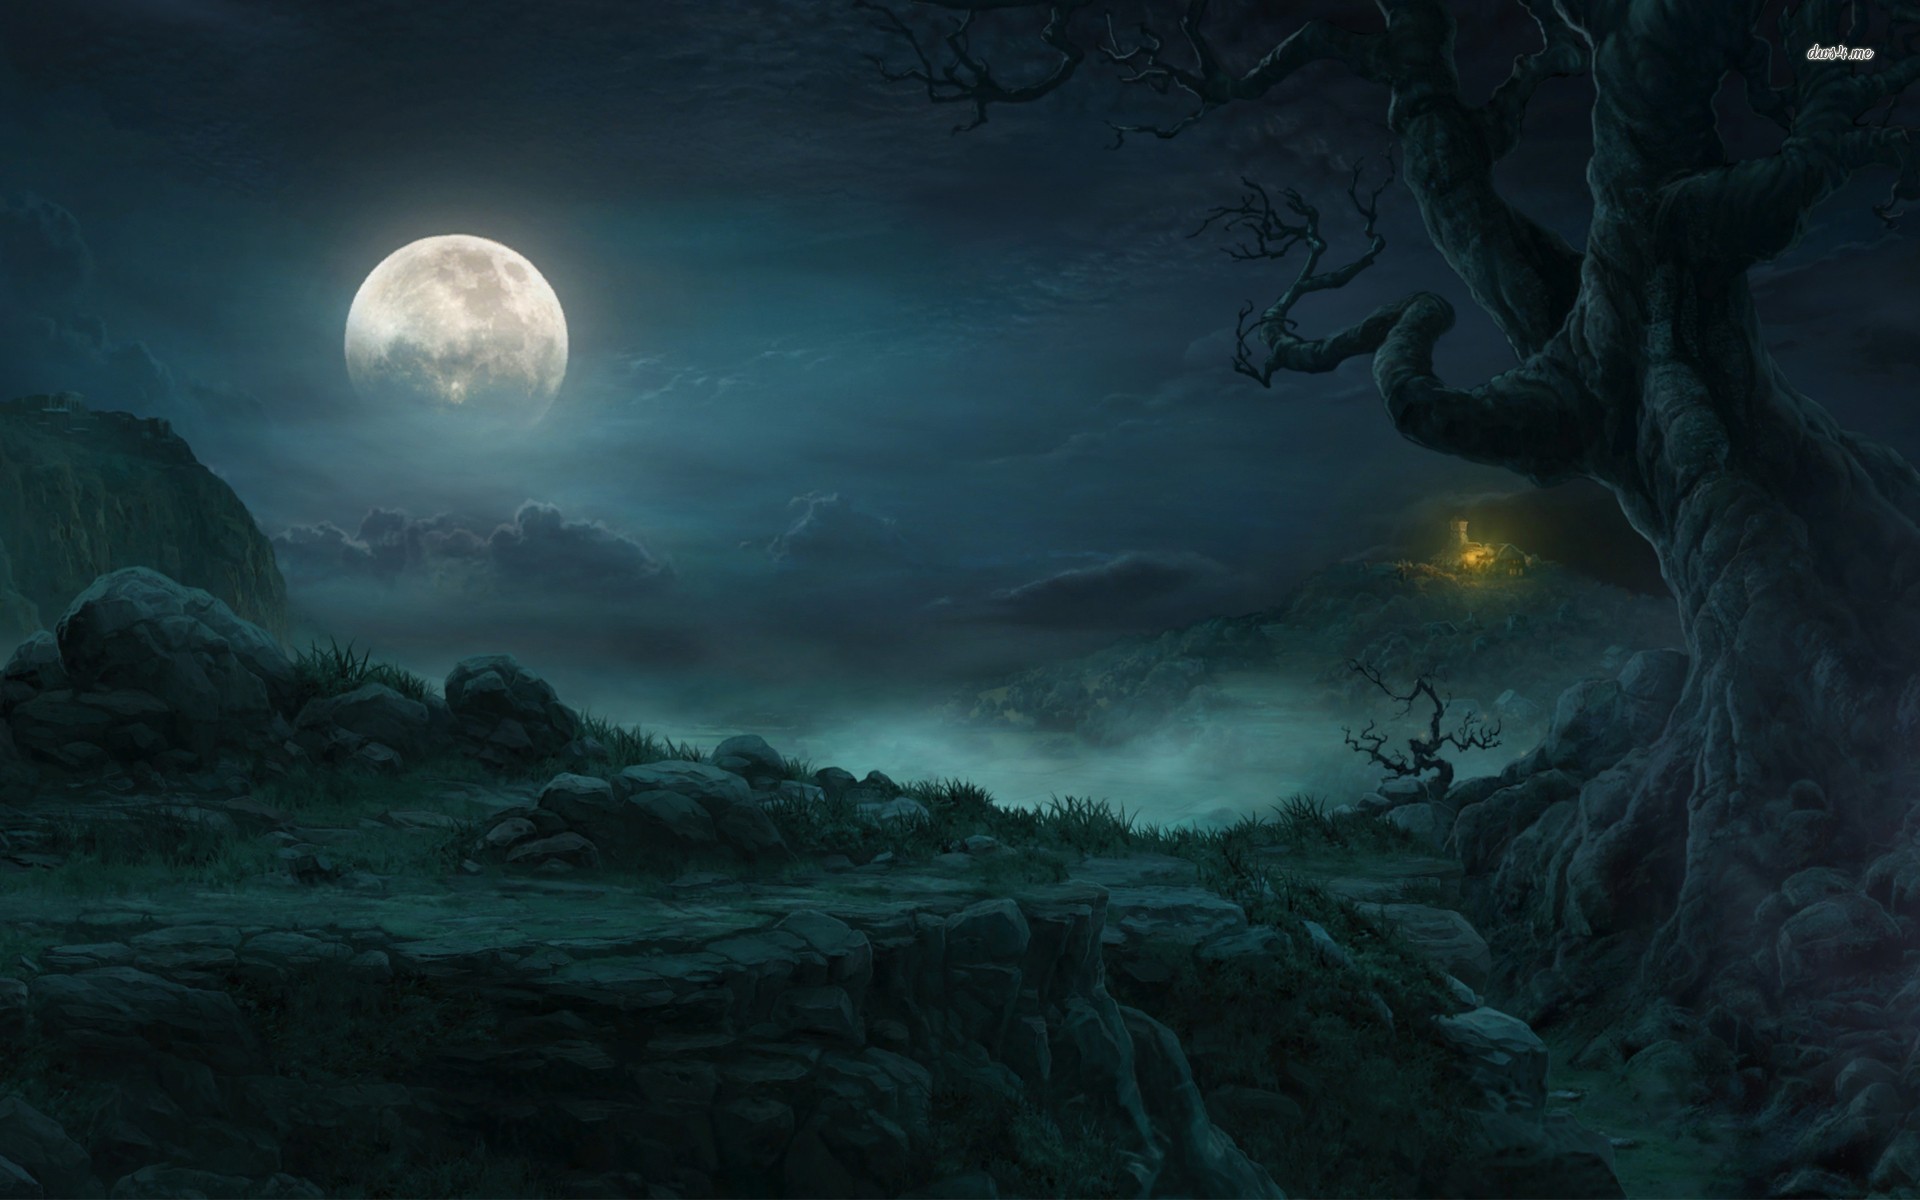 1920x1200 Image - 13038-full-moon-in-the-forest--fantasy-wallpaper.jpg.2b4117be5352ca9046bcaff824ad60d0.jpg  | Animal Jam Clans Wiki | FANDOM powered by Wikia